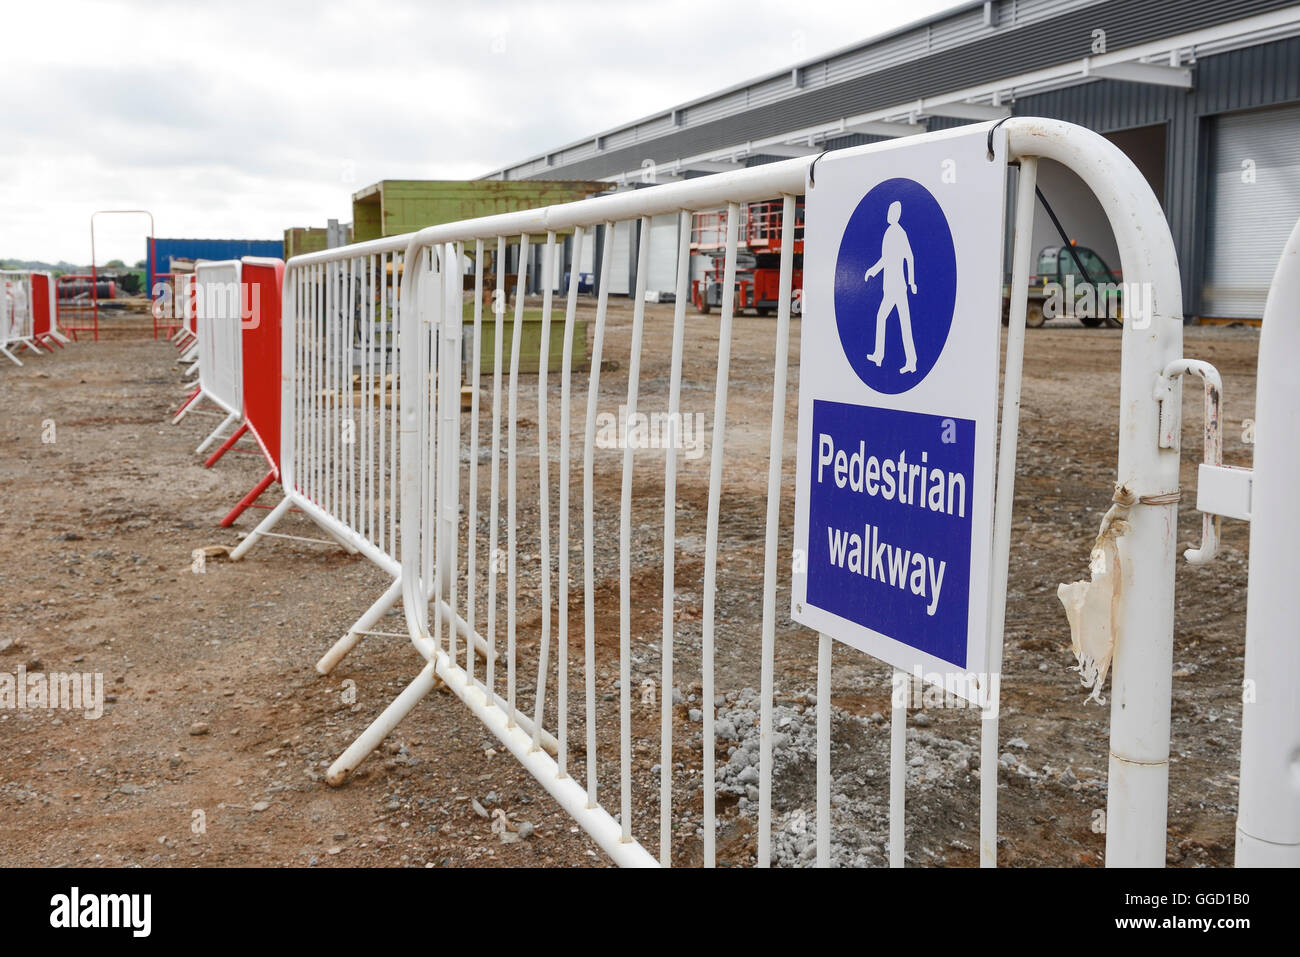 Pedestrian walkway sign and barriers on a UK construction site Stock Photo